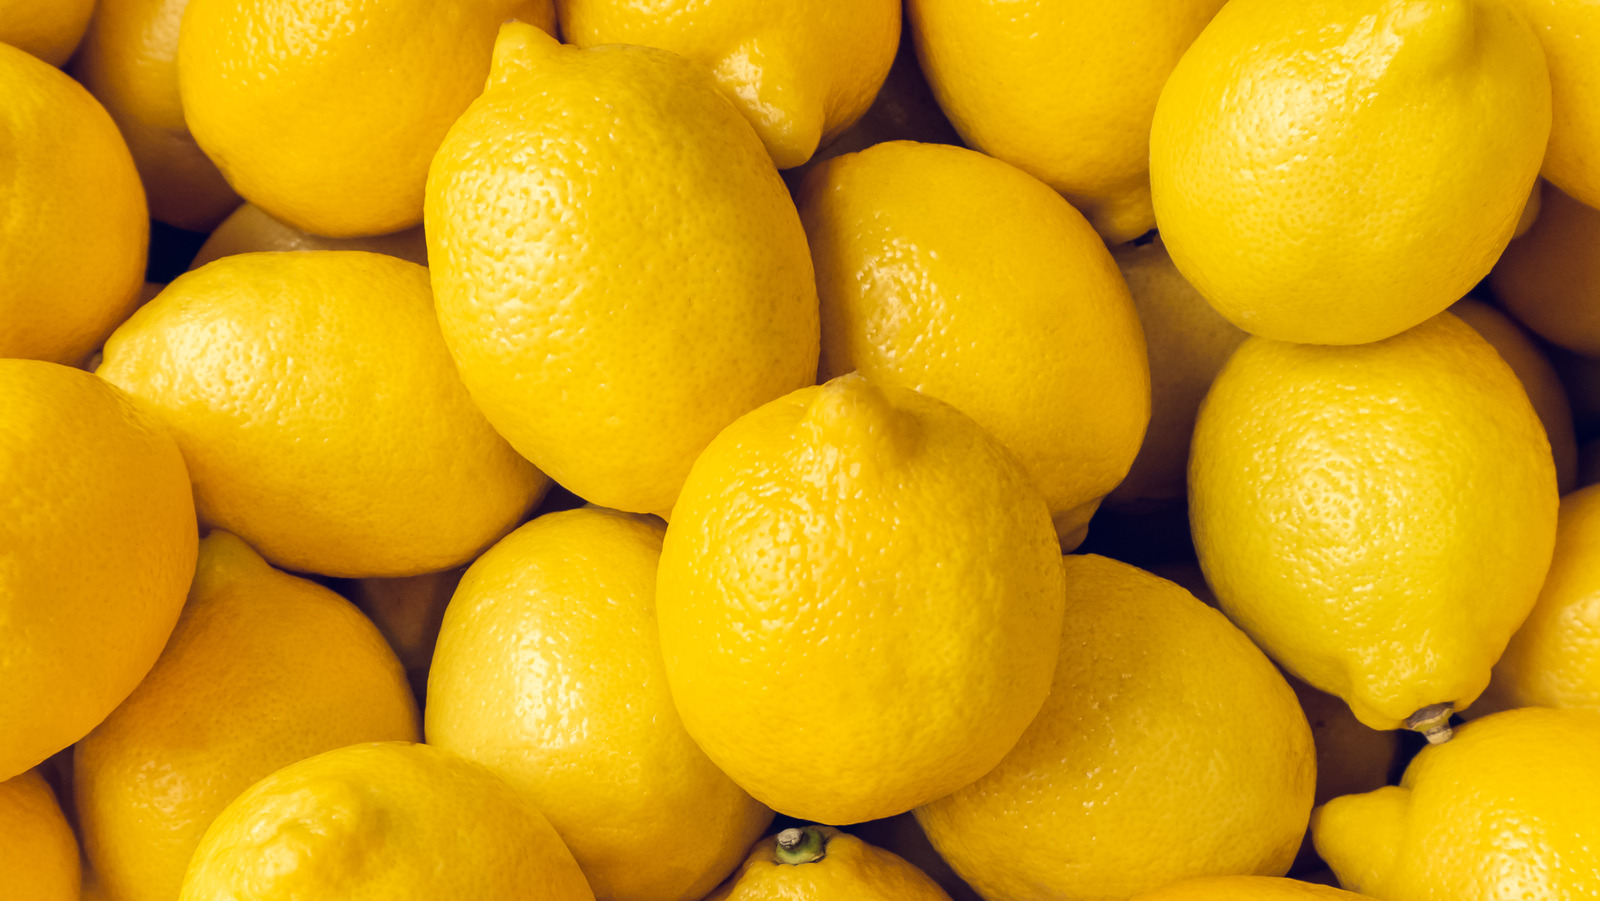 https://www.tastingtable.com/img/gallery/31-types-of-lemons-and-what-makes-them-unique/l-intro-1656086555.jpg